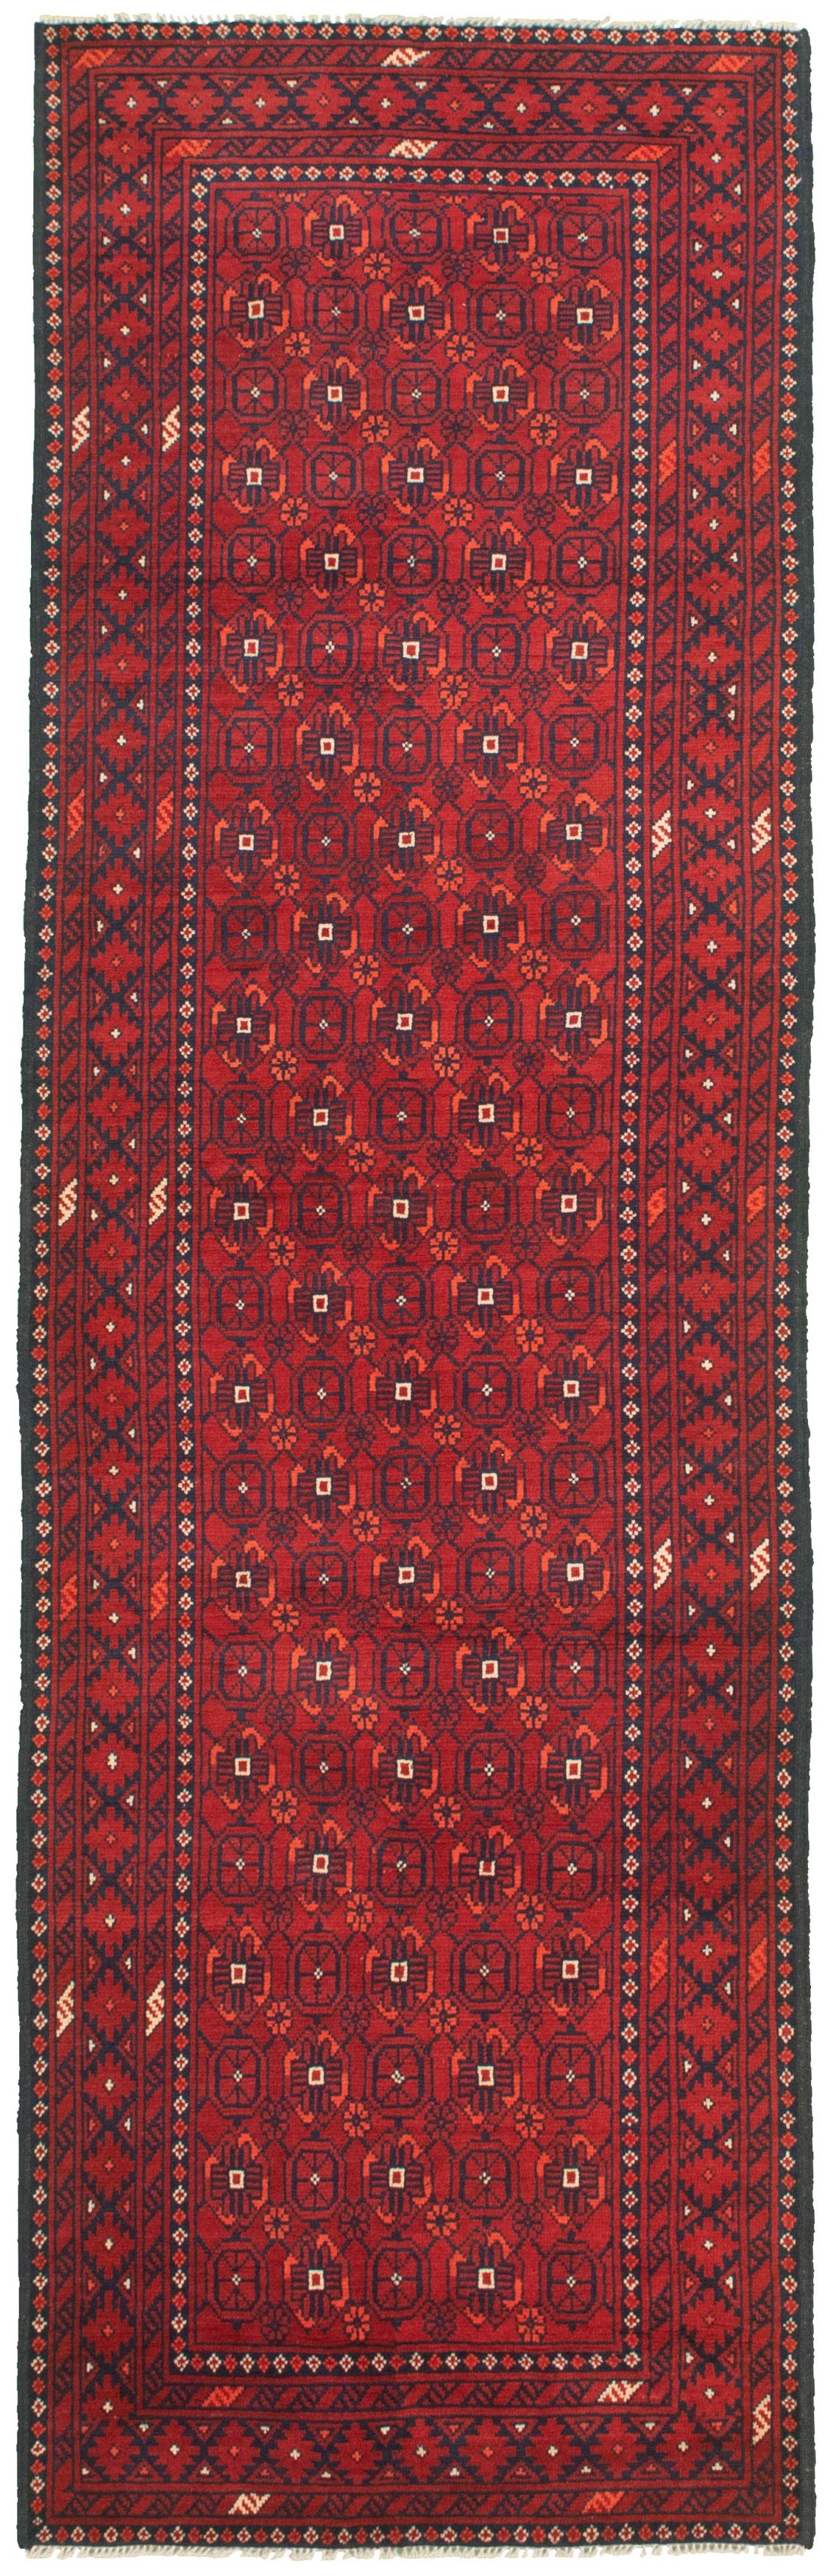 Hand-knotted Finest Khal Mohammadi Dark Red  Rug 2'9" x 9'6" Size: 2'9" x 9'6"  